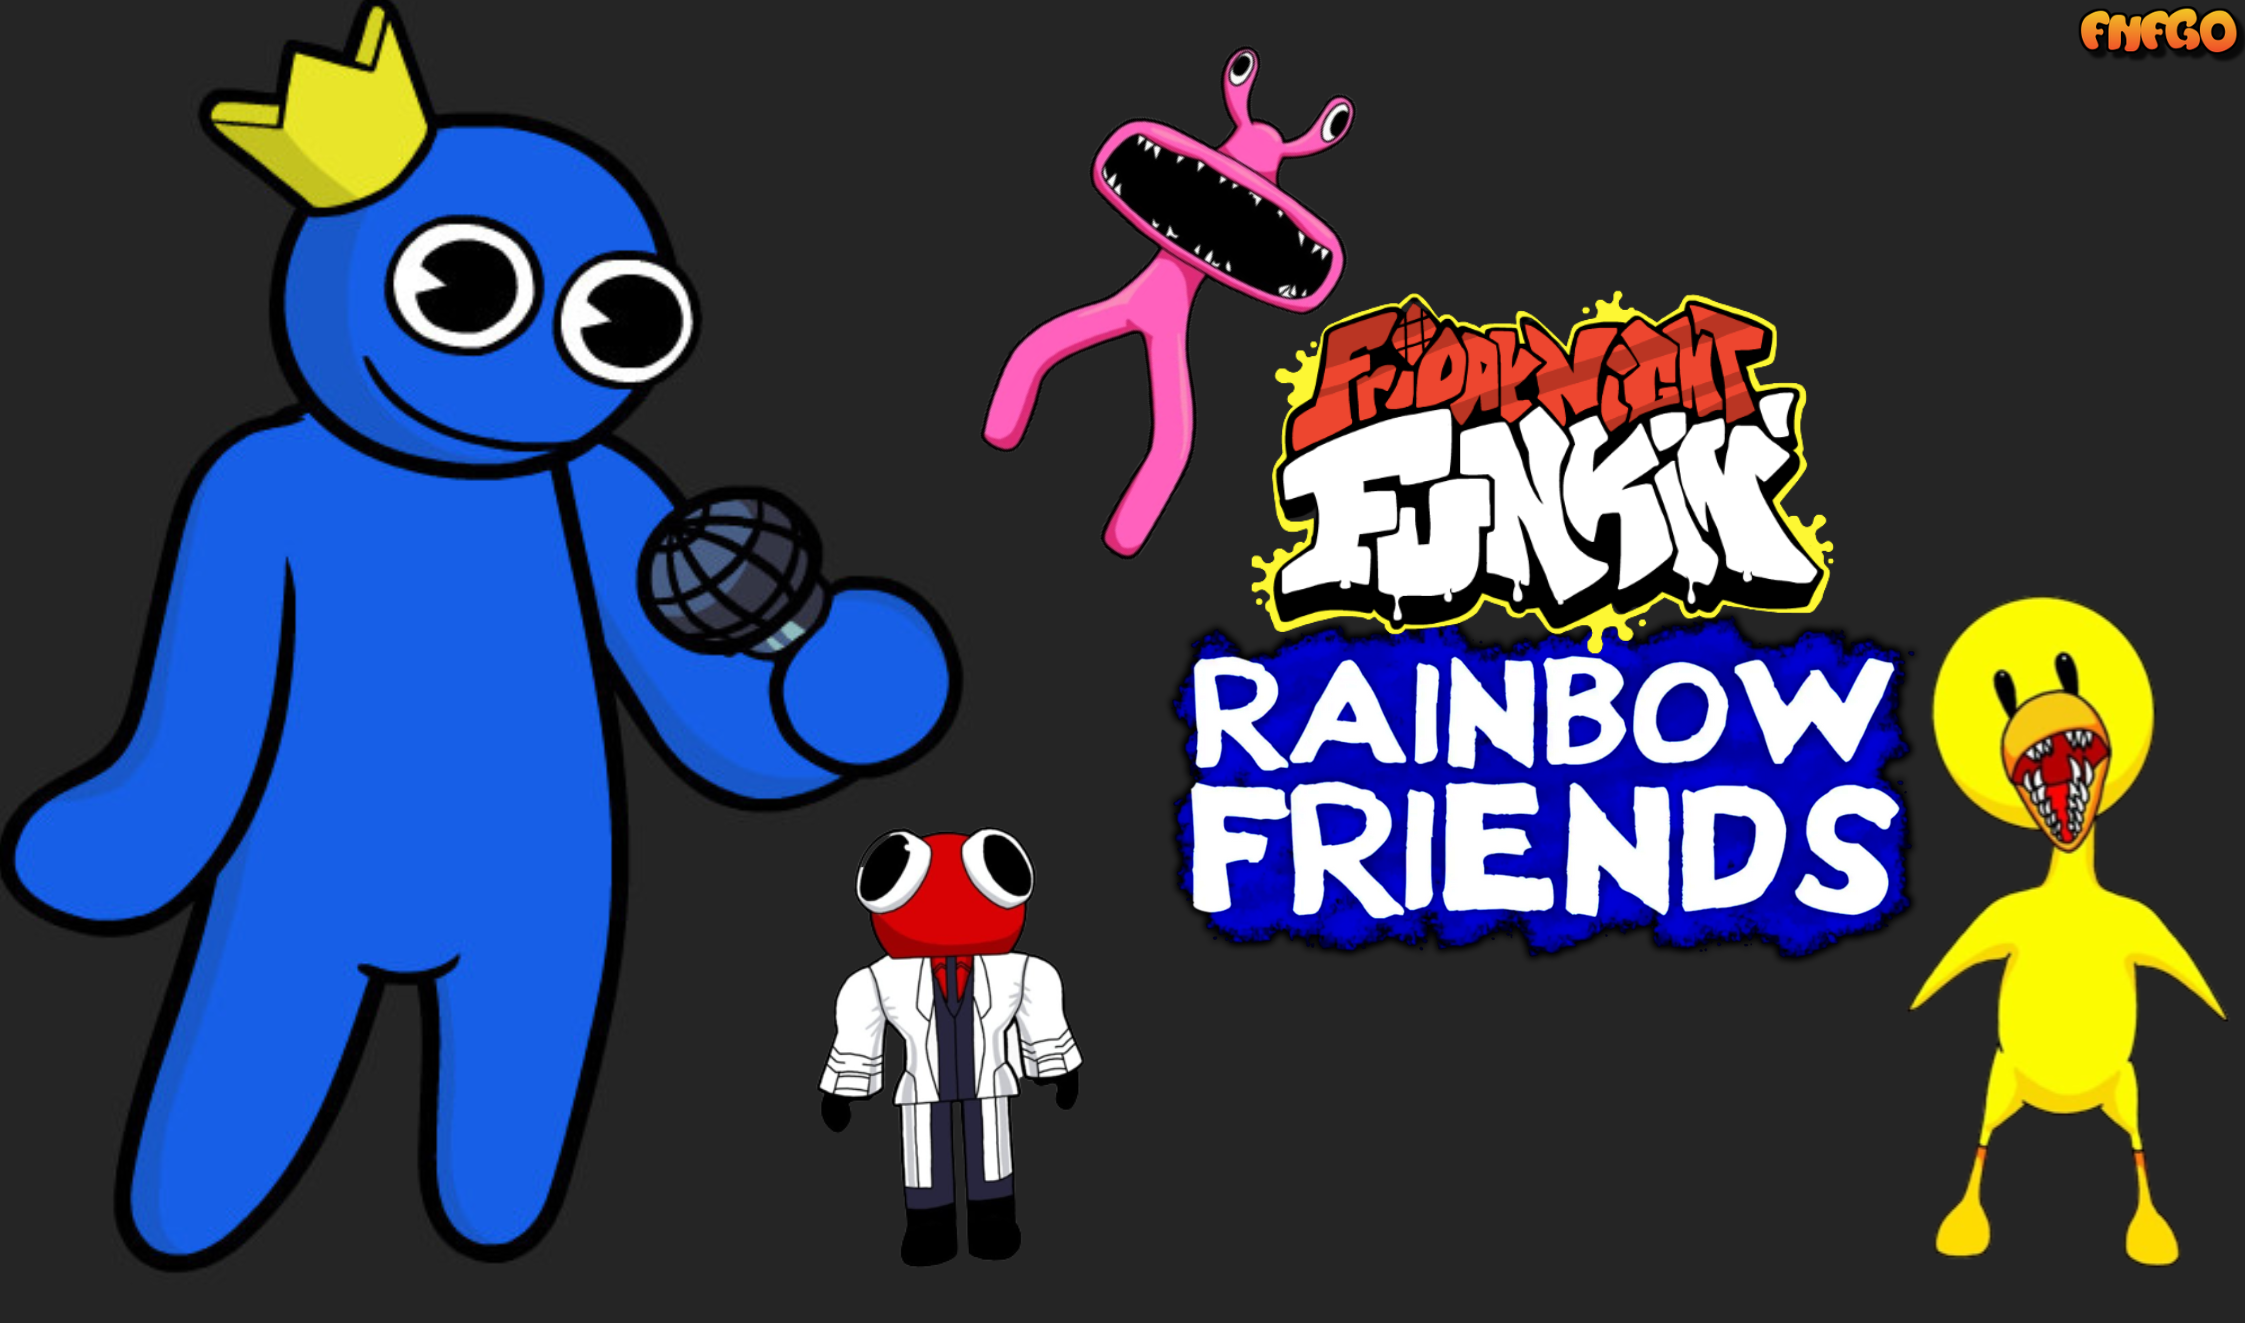 FNF Rainbow Friends But Yellow, Pink, Red Join Mod - Play Online Free - FNF  GO